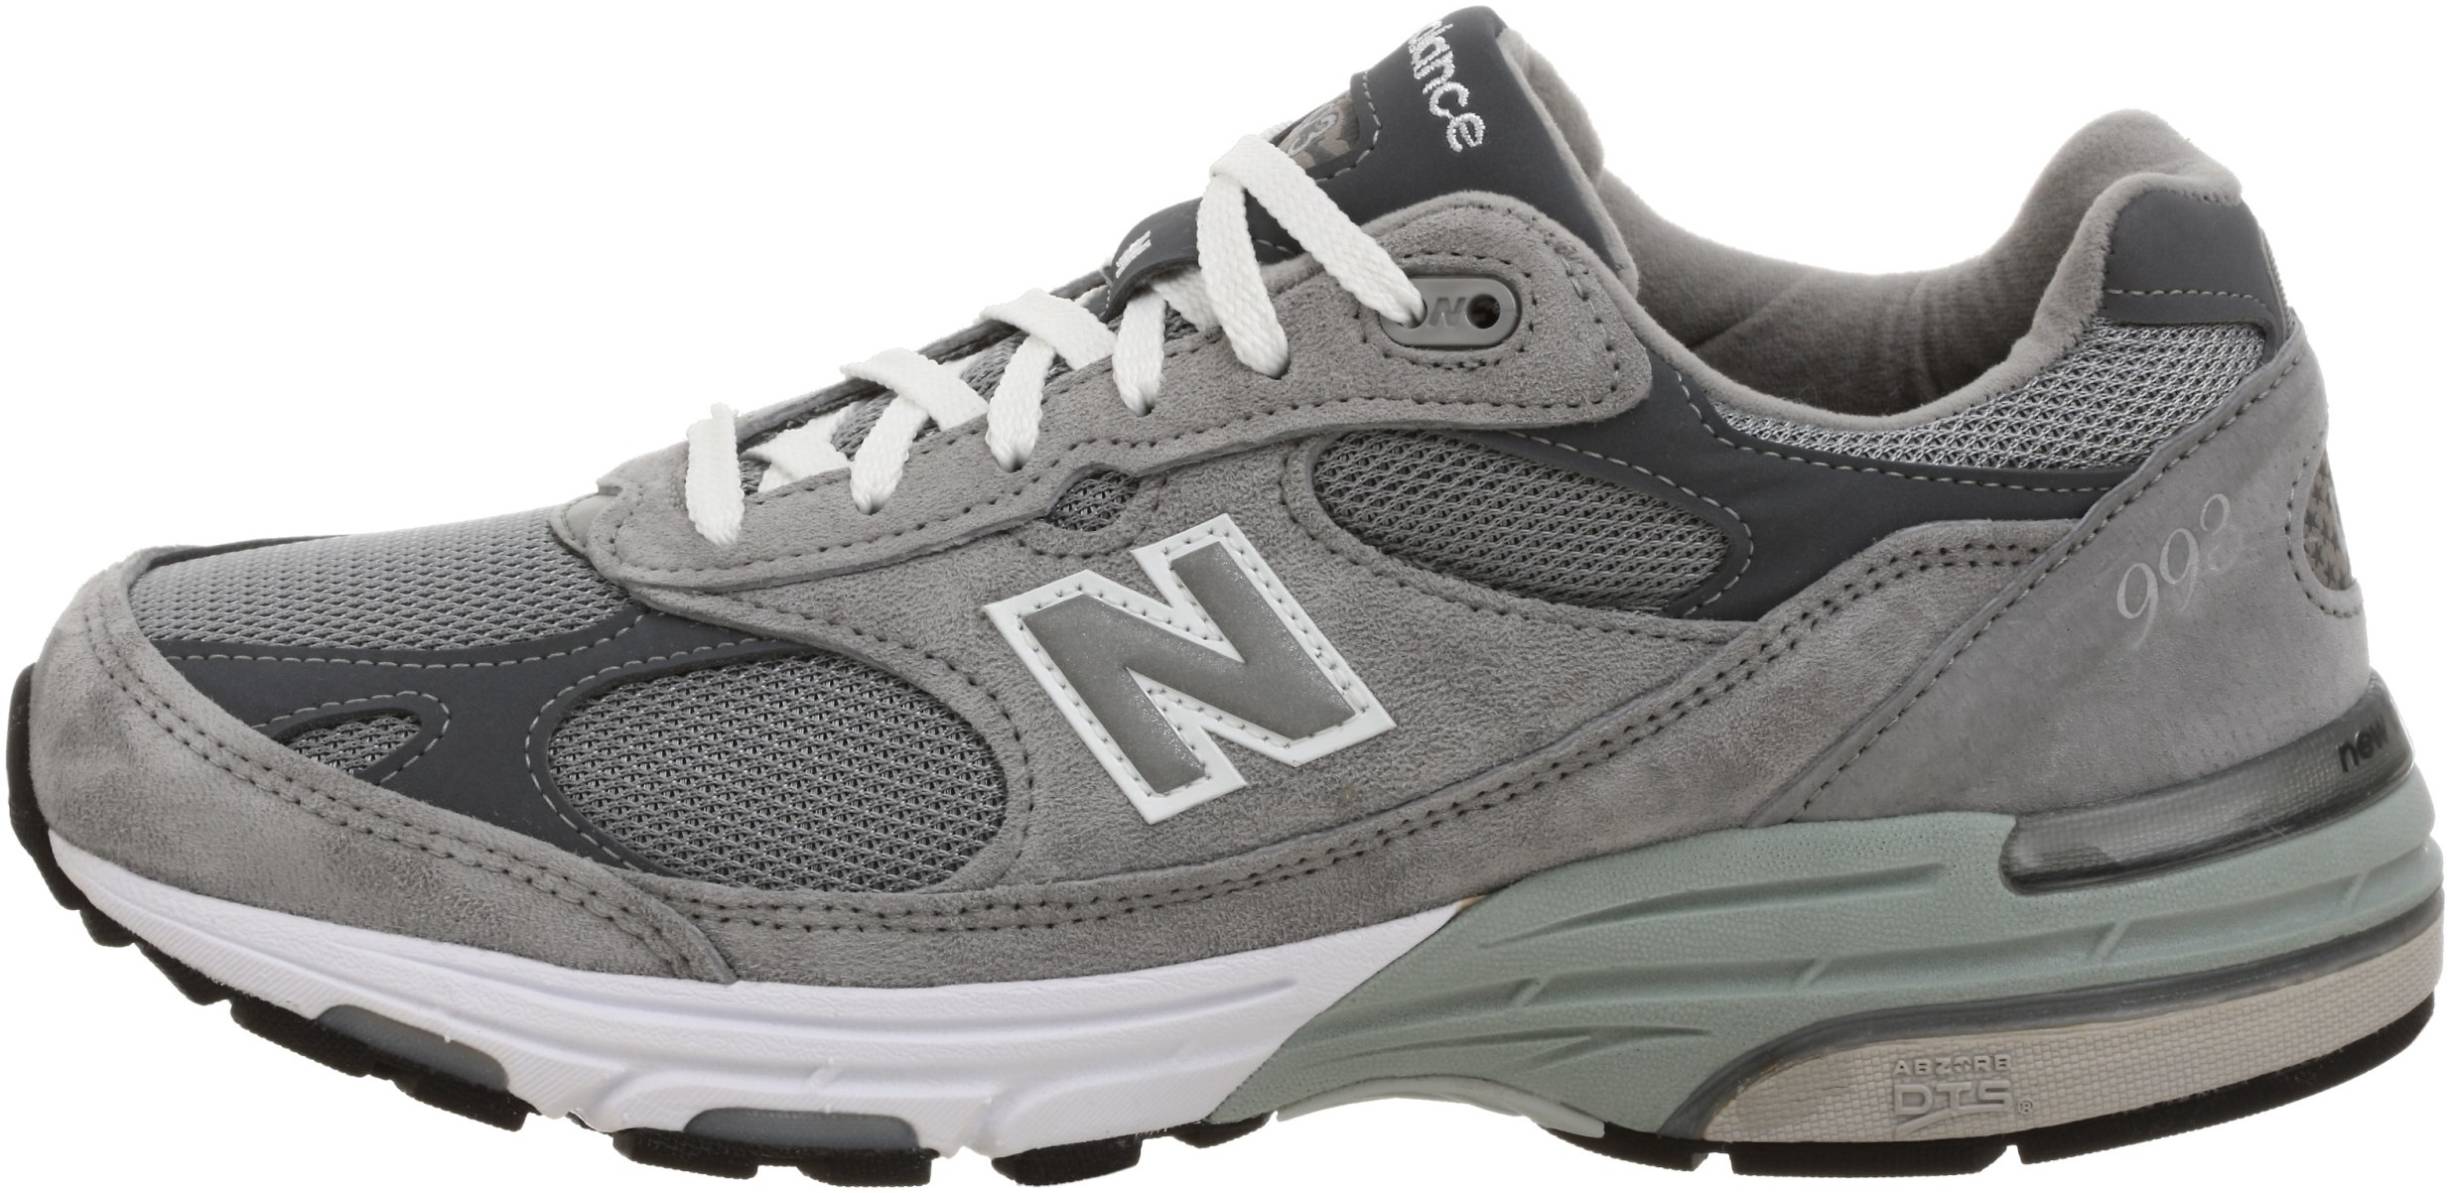 10+ New Balance made in usa sneakers: Save up to 51% | RunRepeat